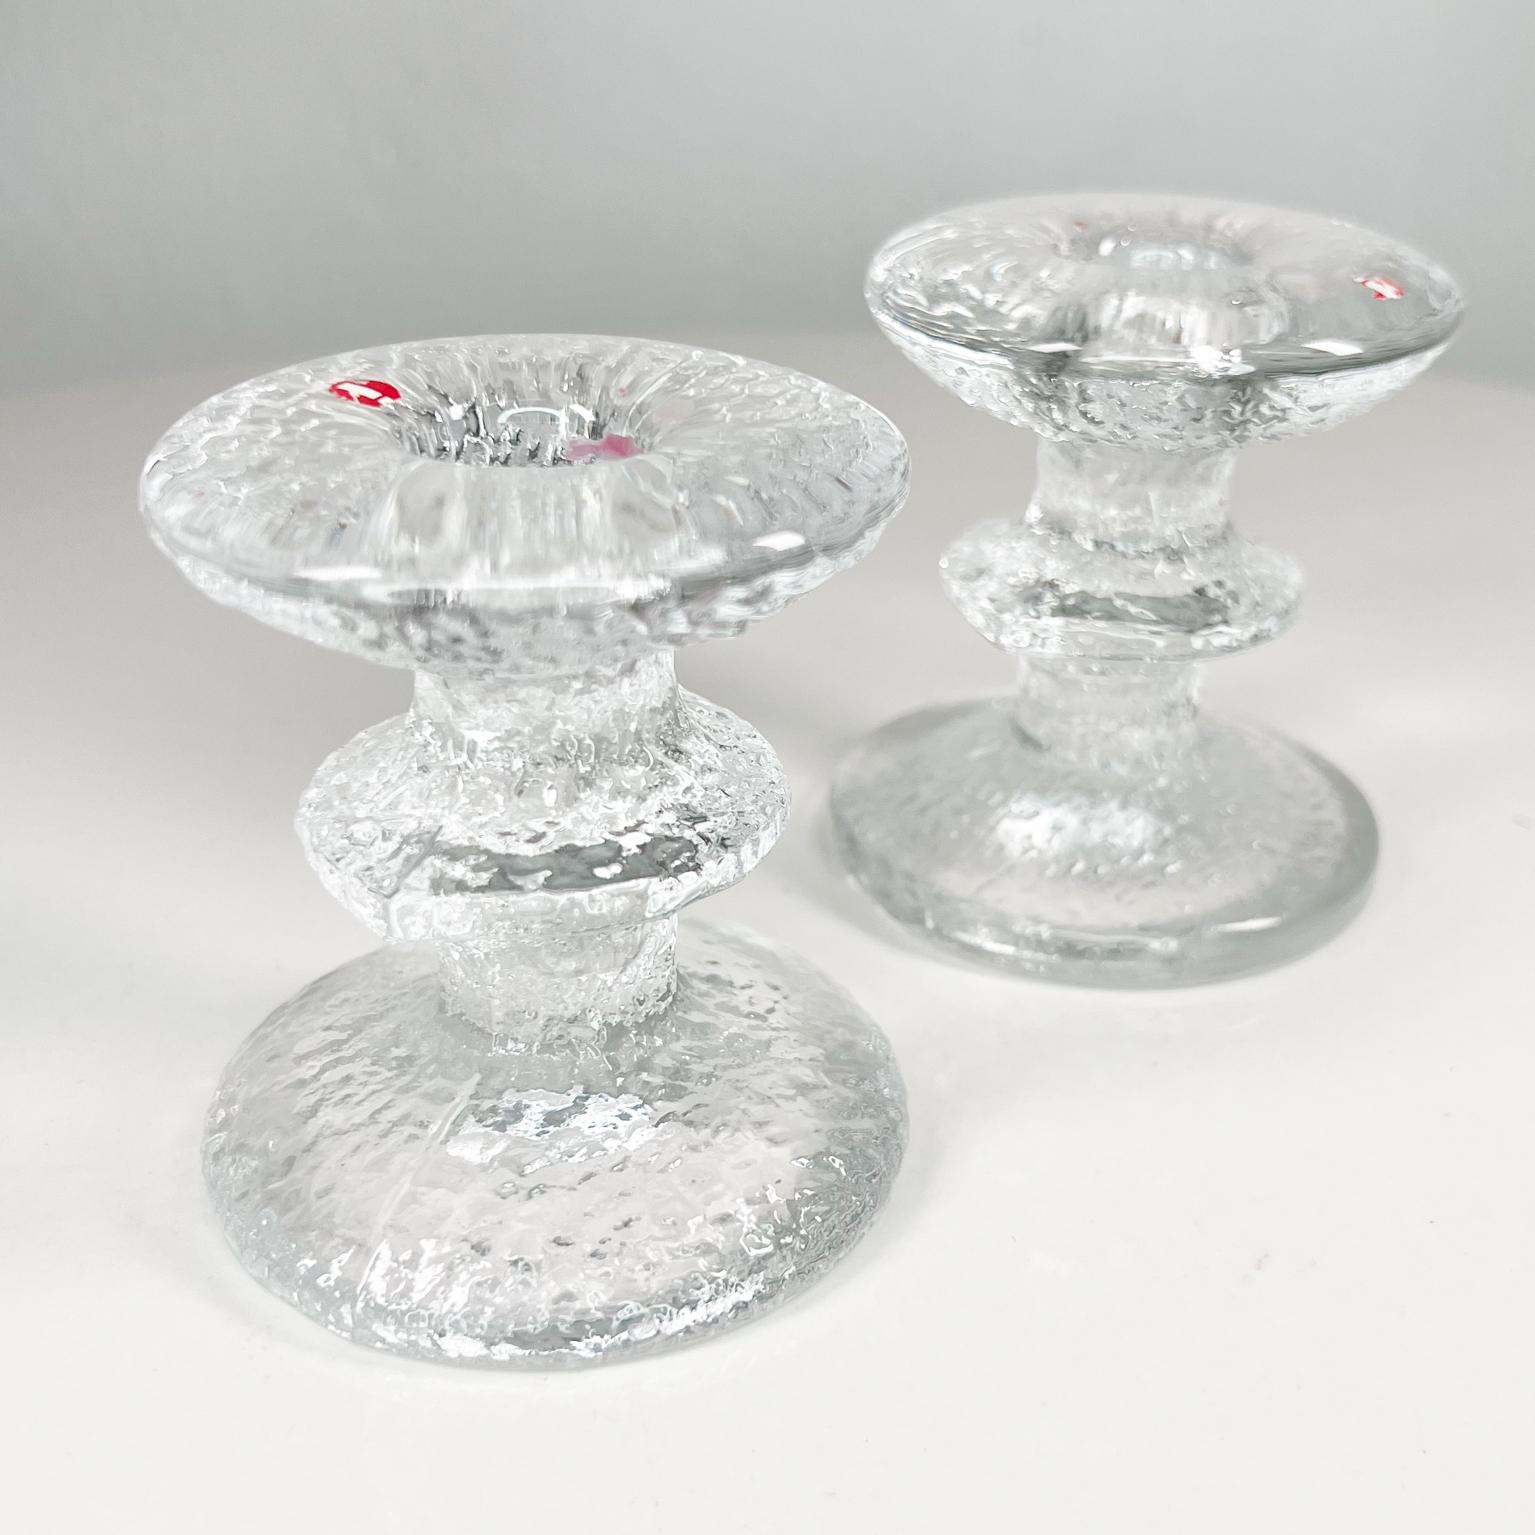 1967 Timo Sarpaneva art glass Festivo candle holders made Finland
Measures: 2.63 diameter x 3.13 tall
by Timo Sarpaneva Iittala made in Finland
Maker stamp present
Preowned original unrestored vintage condition.
Please see images provided.
 